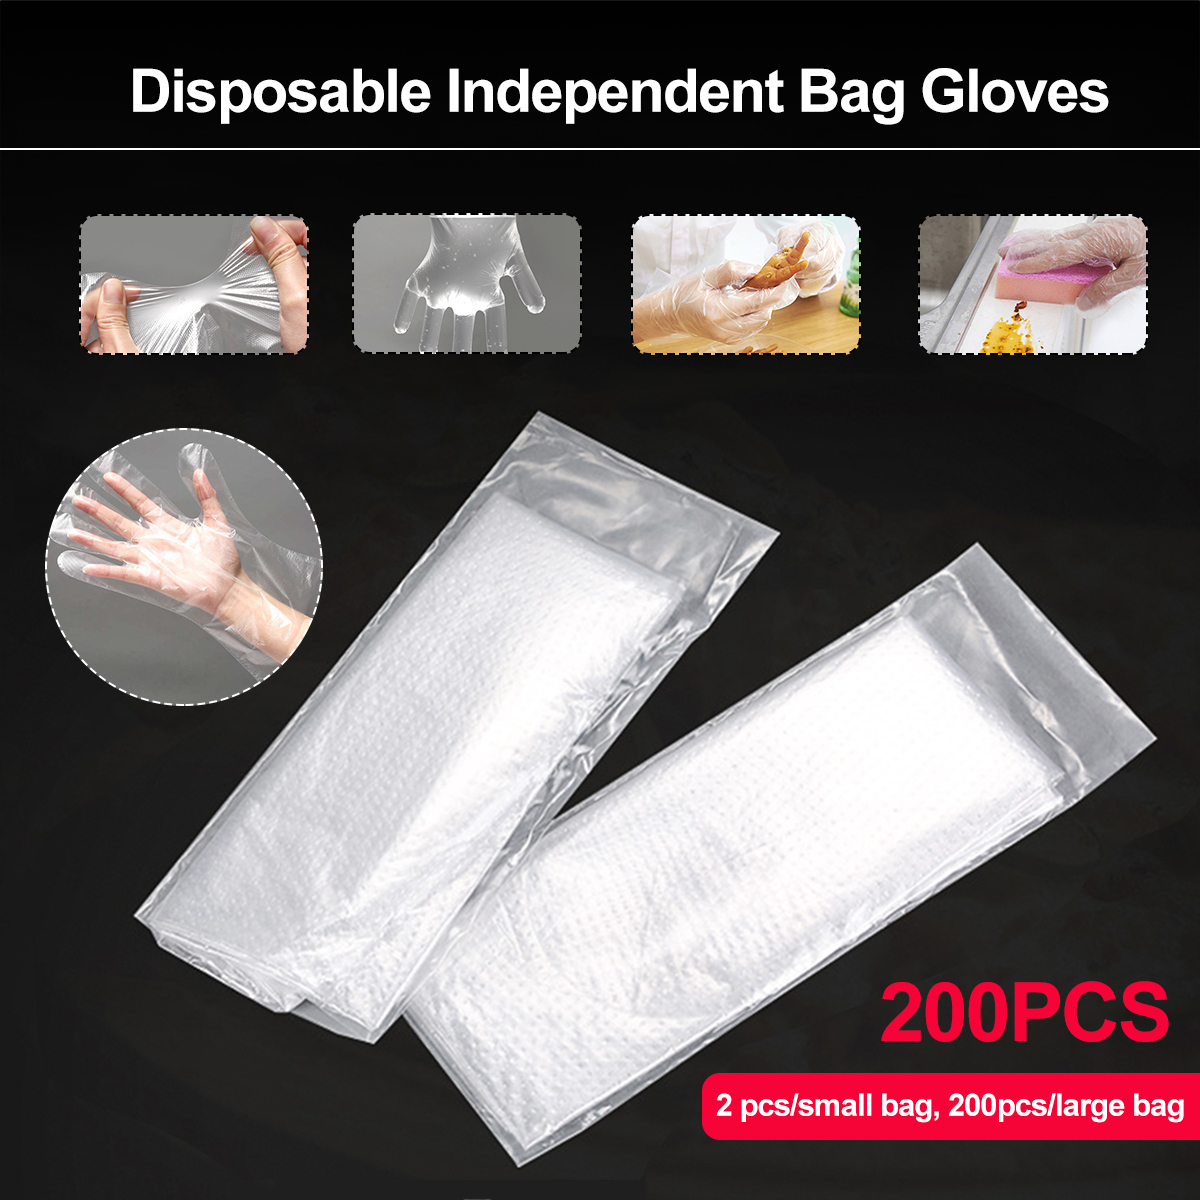 100PCS-Food-Grade-Disposable-Vinyl-Gloves-Anti-static-Plastic-Gloves-Home-Outdoor-Hiking-Camping-Glo-1657491-5